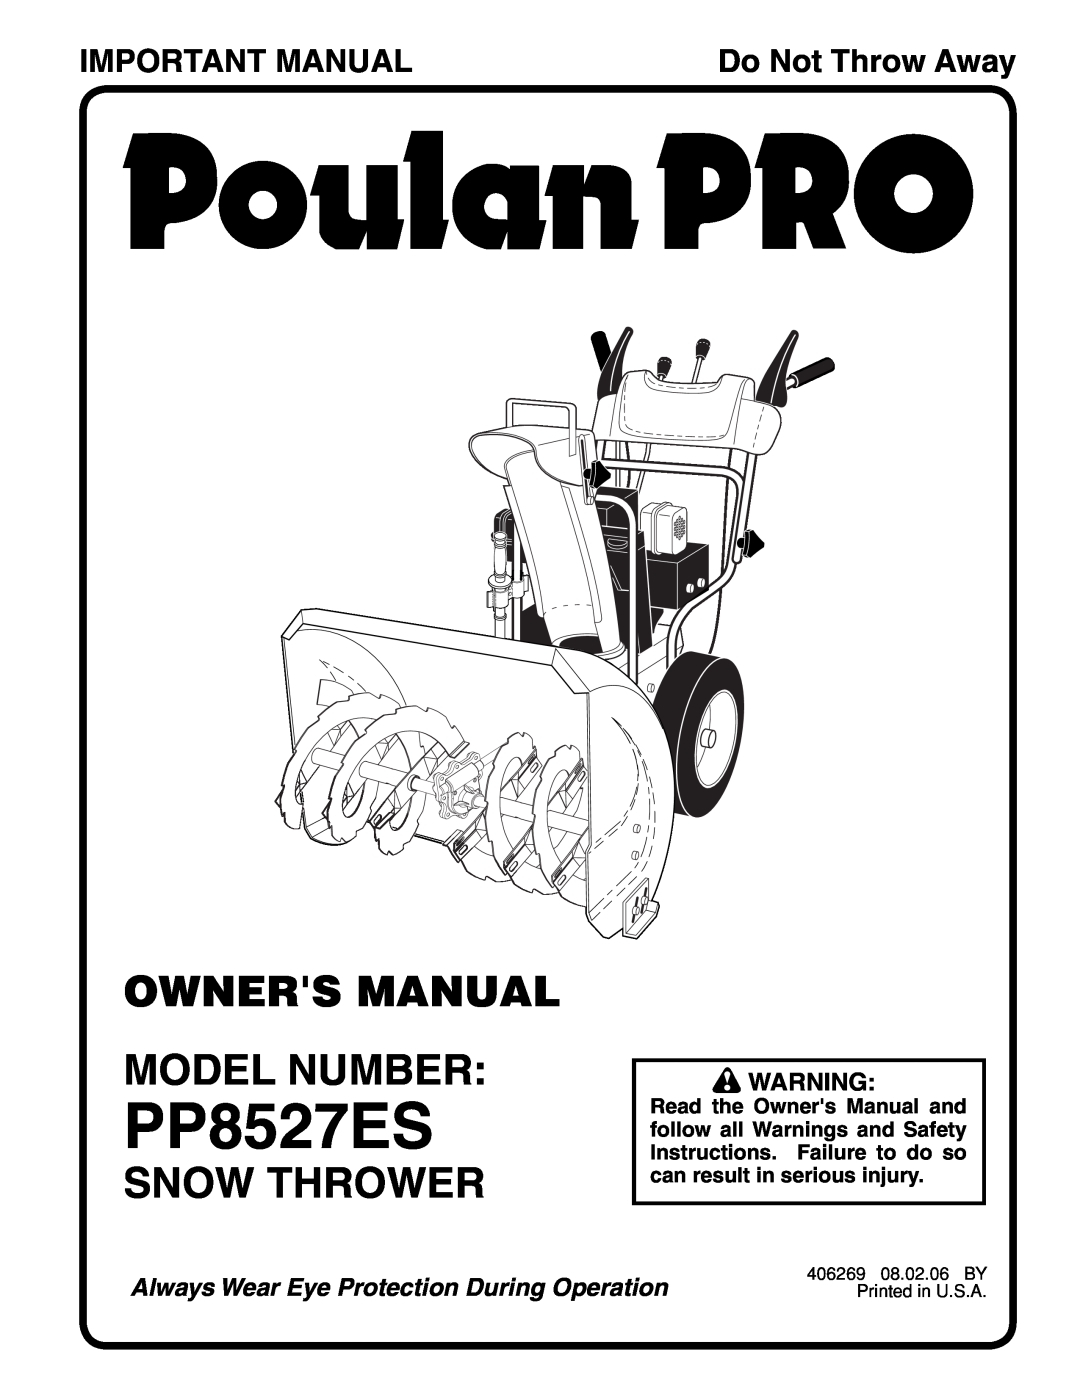 Poulan PP8527ES owner manual Snow Thrower, Important Manual, Do Not Throw Away 